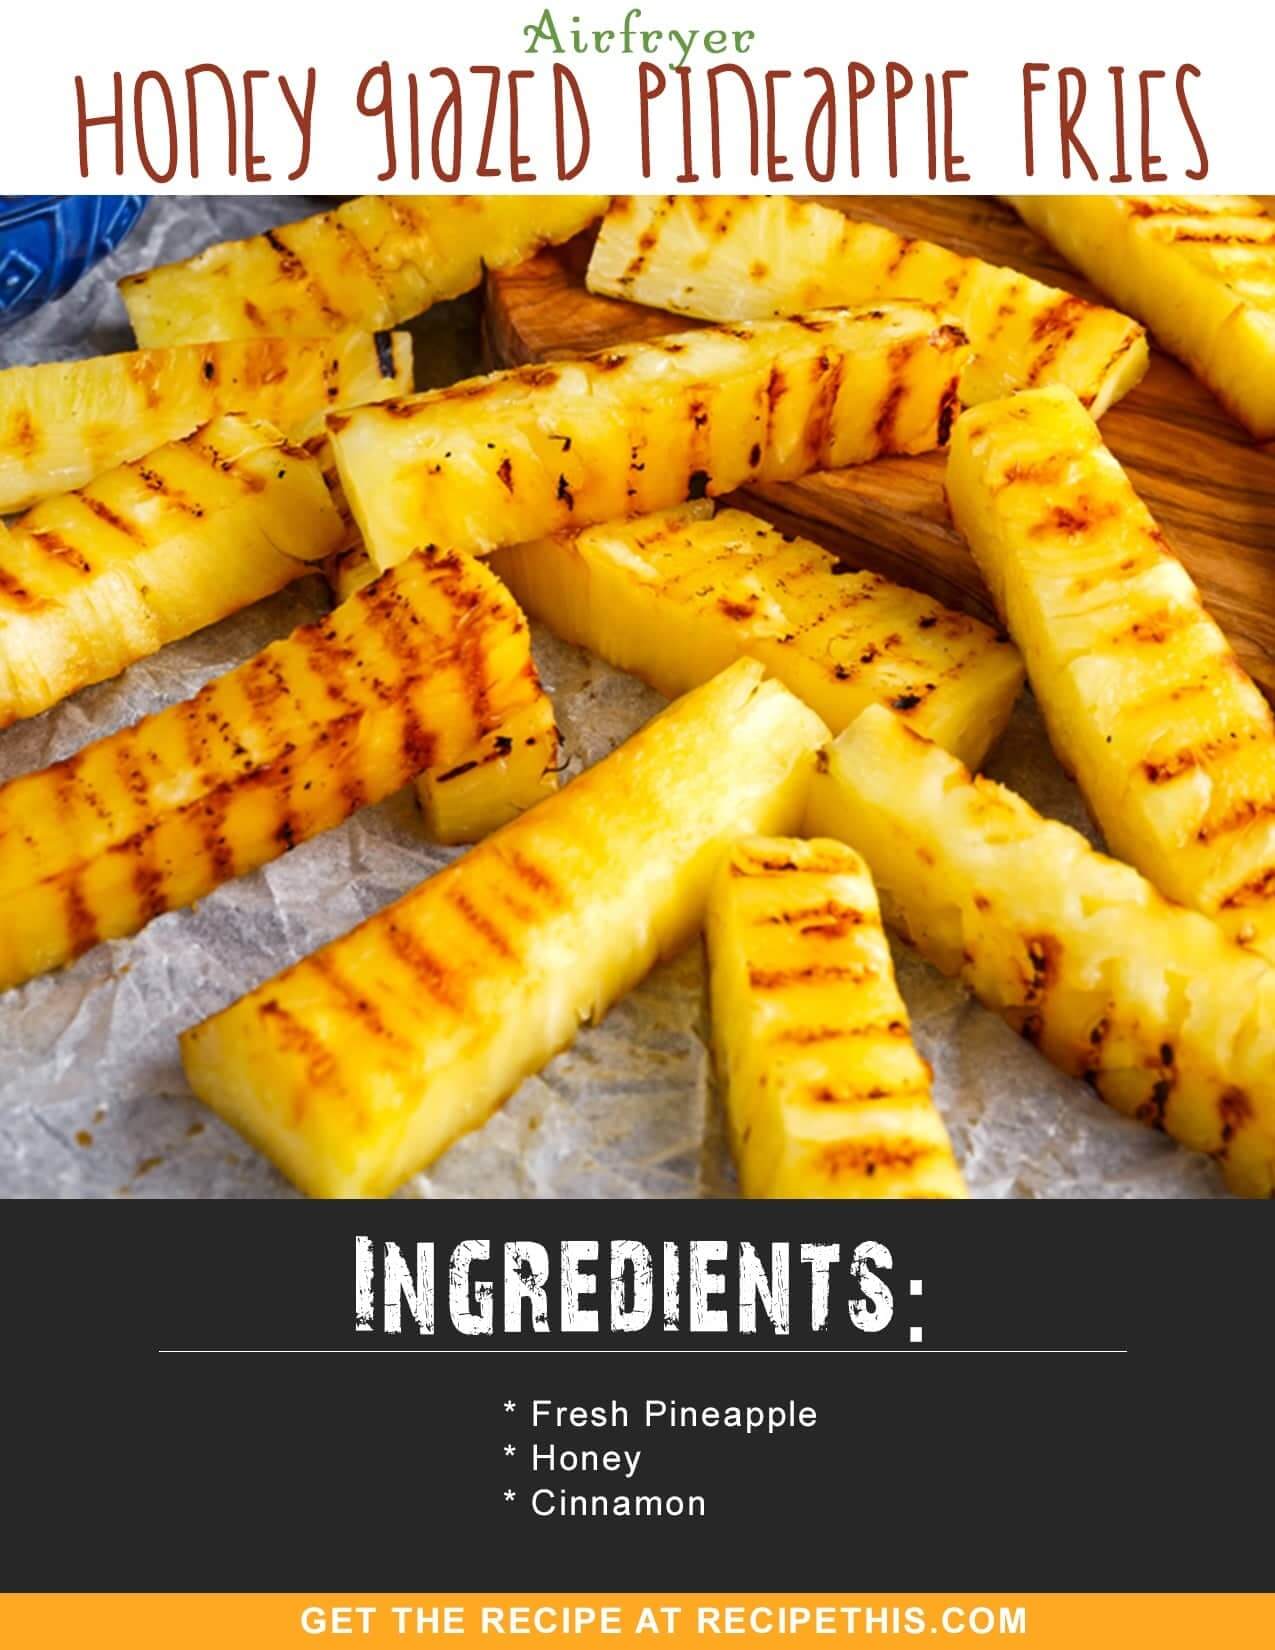 Airfryer Recipes | Airfryer Honey Glazed Pineapple Fries Recipe from RecipeThis.com